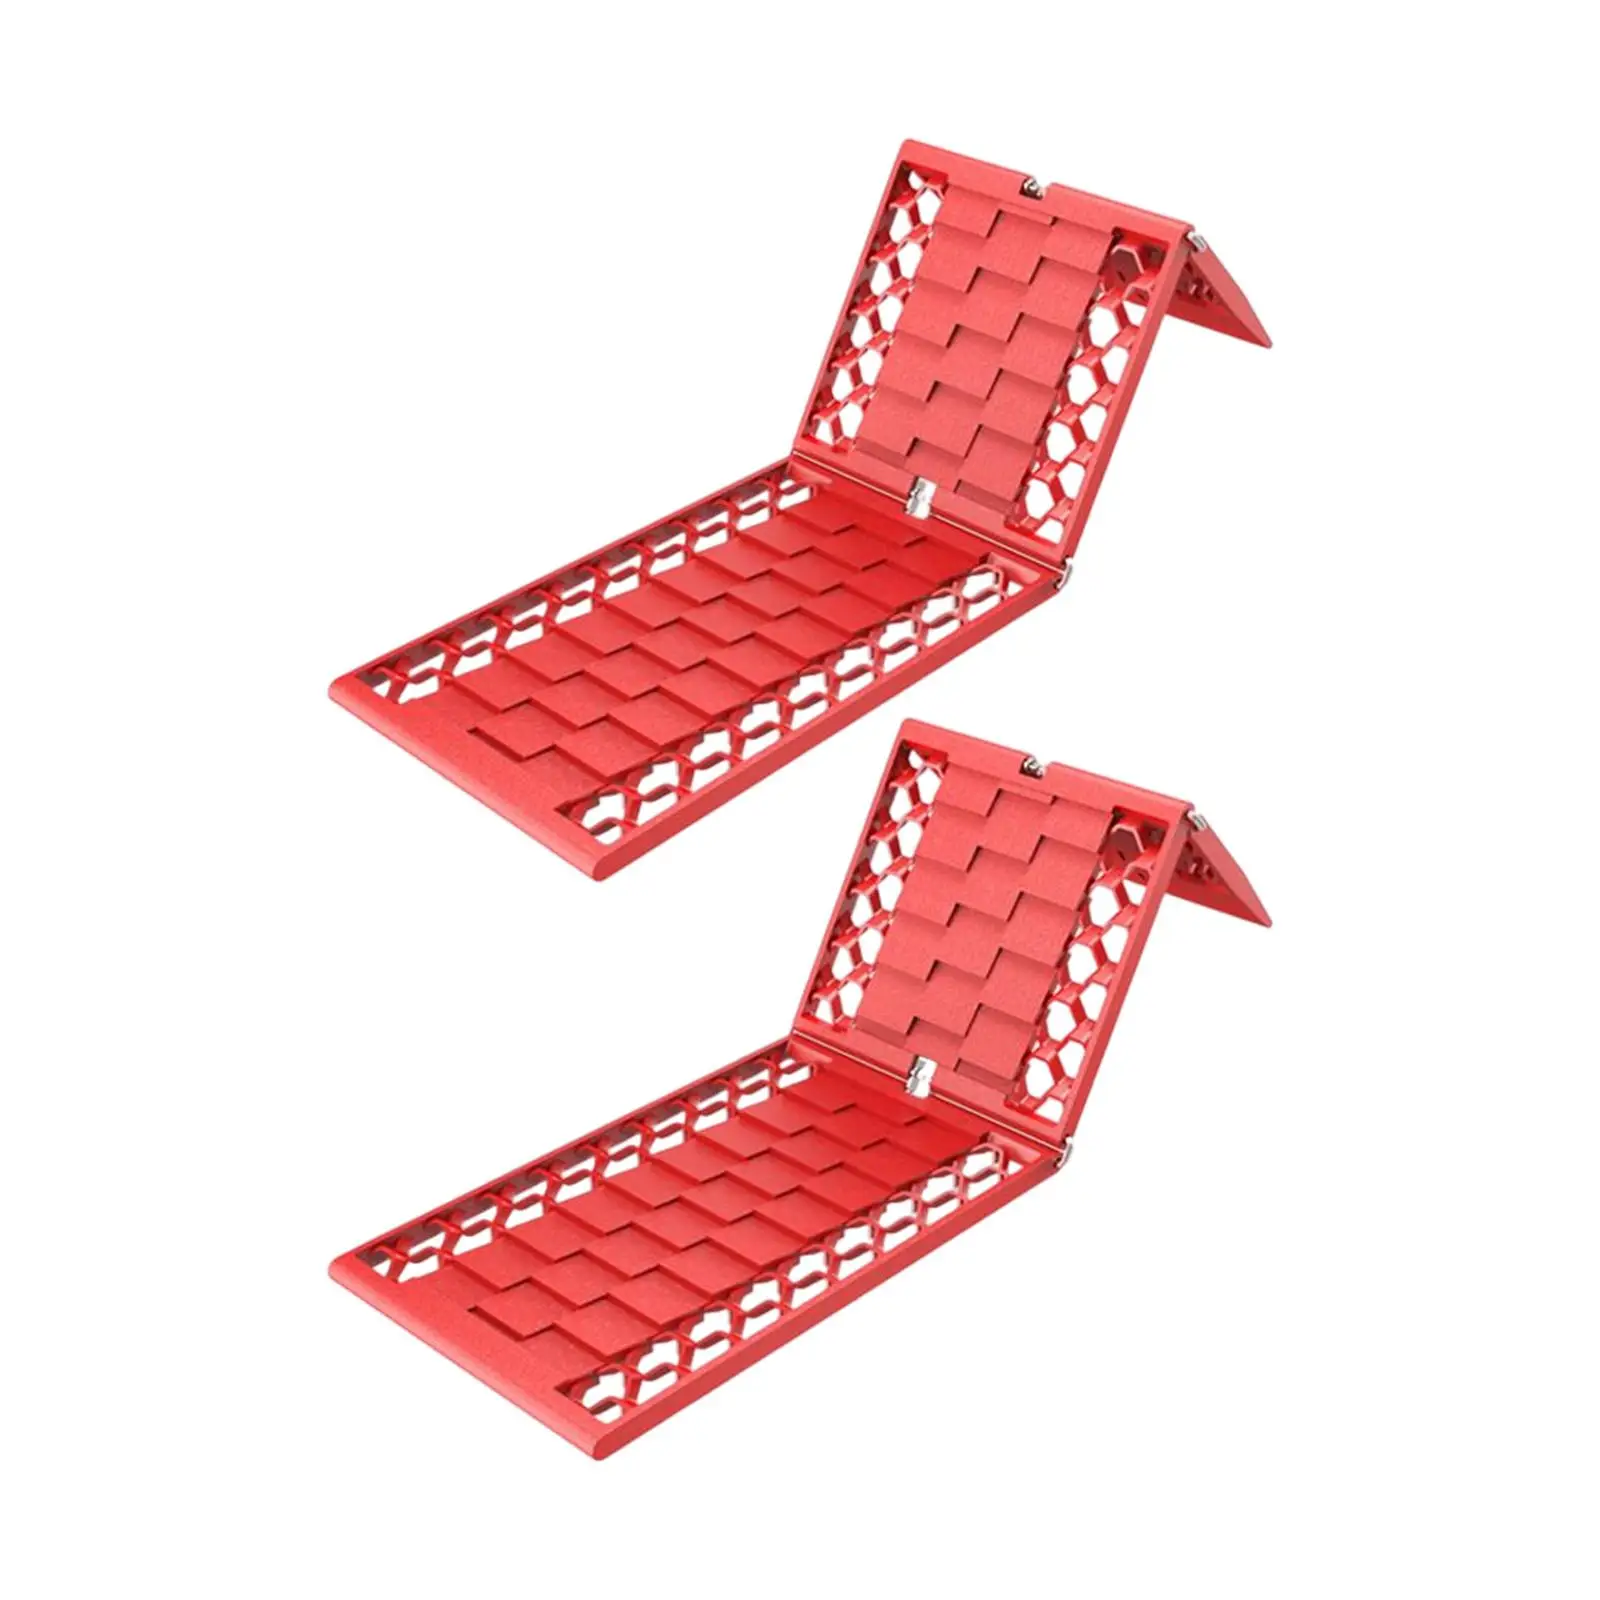 2 Pieces Traction Boards Tire grip Grabber for Sand Vehicle Cars